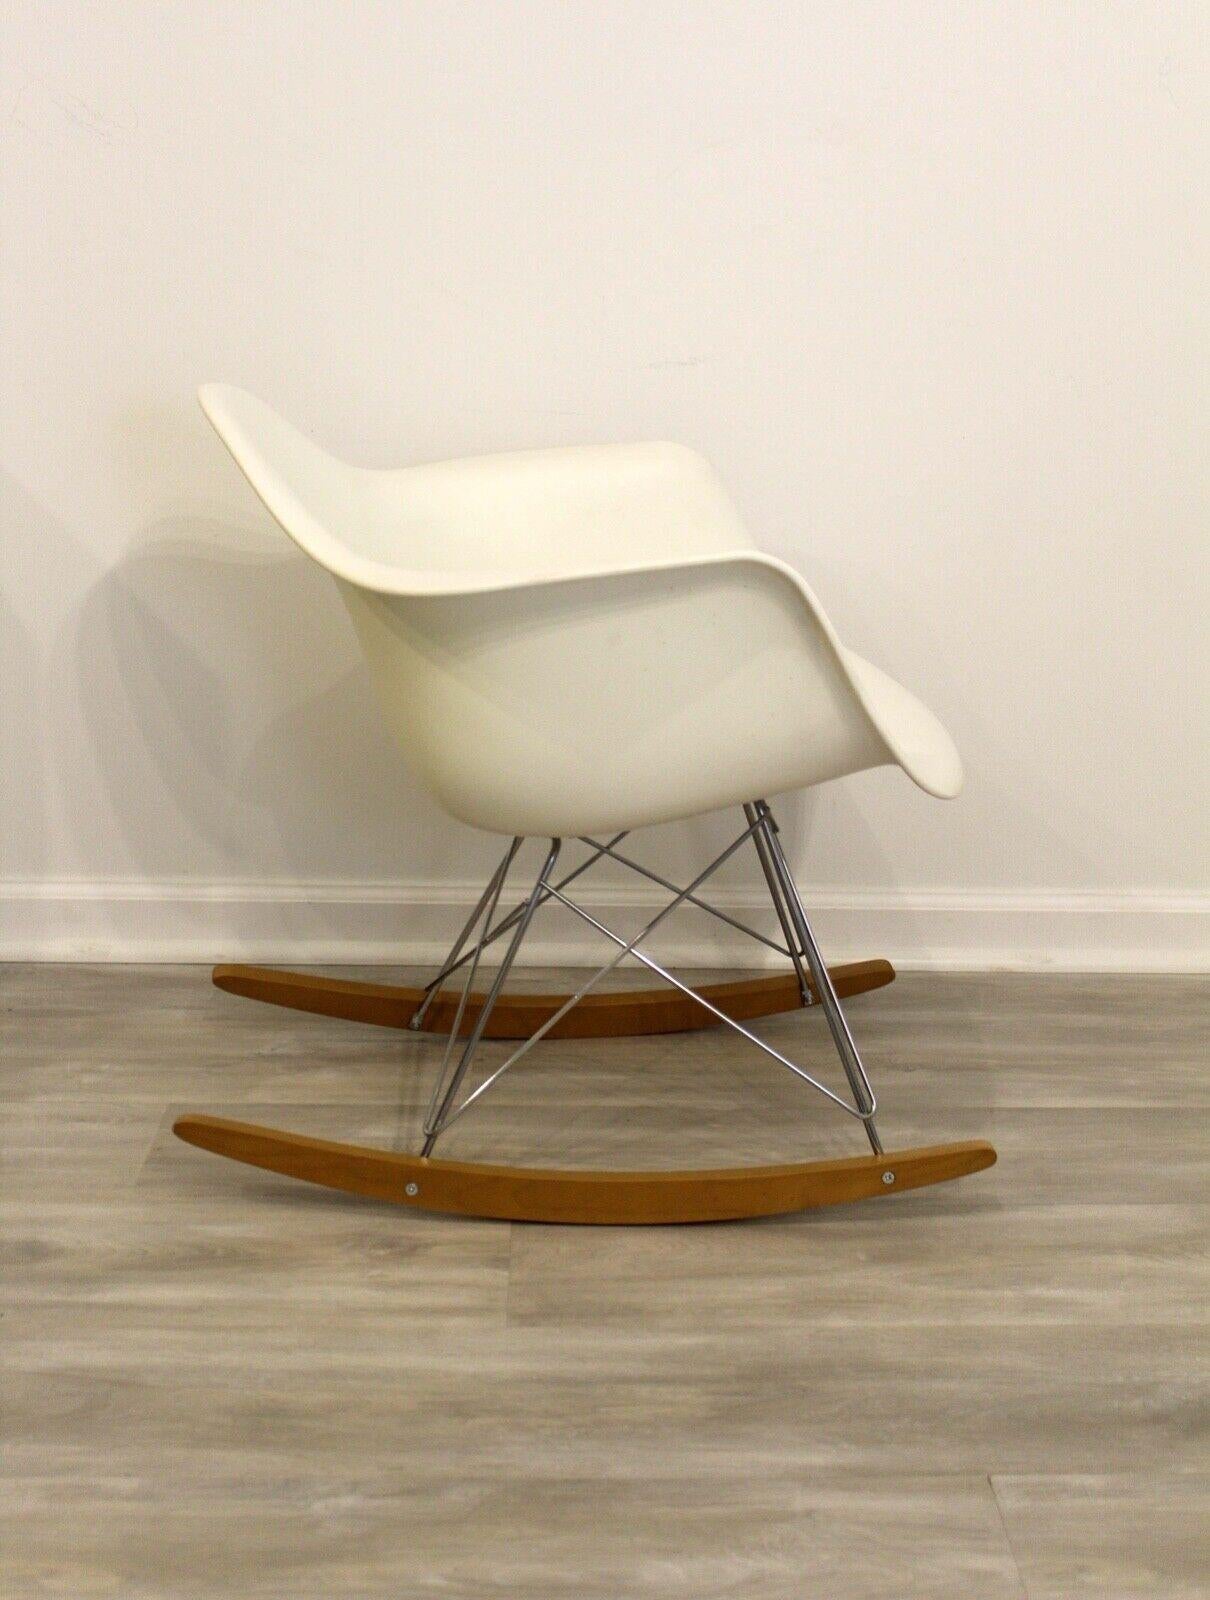 20th Century Mid-Century Modern Style Authentic Herman Miller Eames Molded Shell Chair Rocker